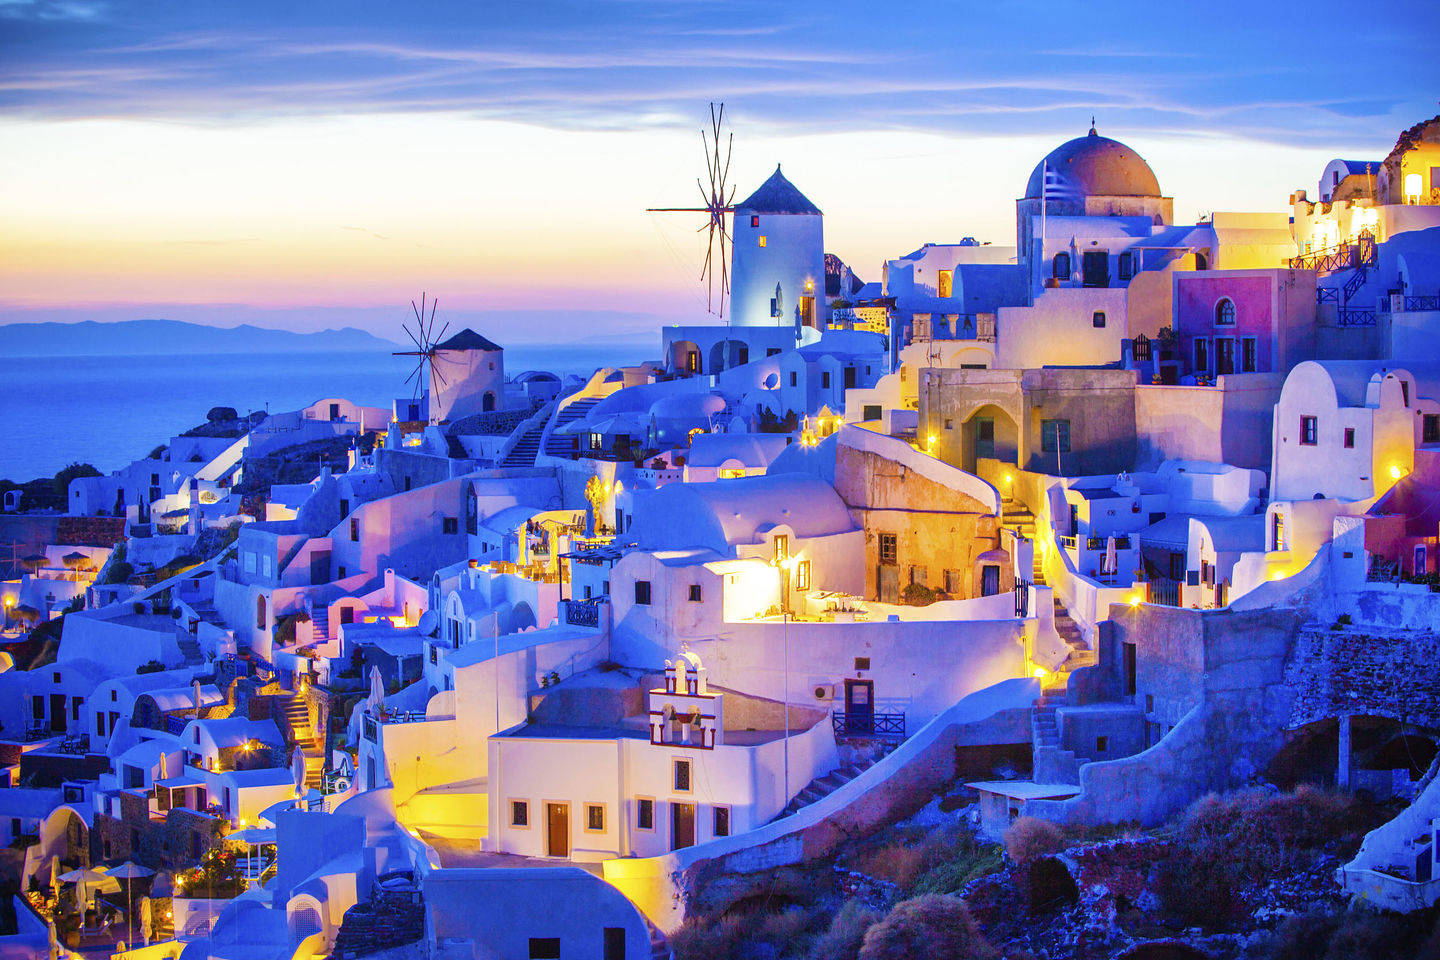 Greece approves 813MW photovoltaic+solar thermal+energy storage project